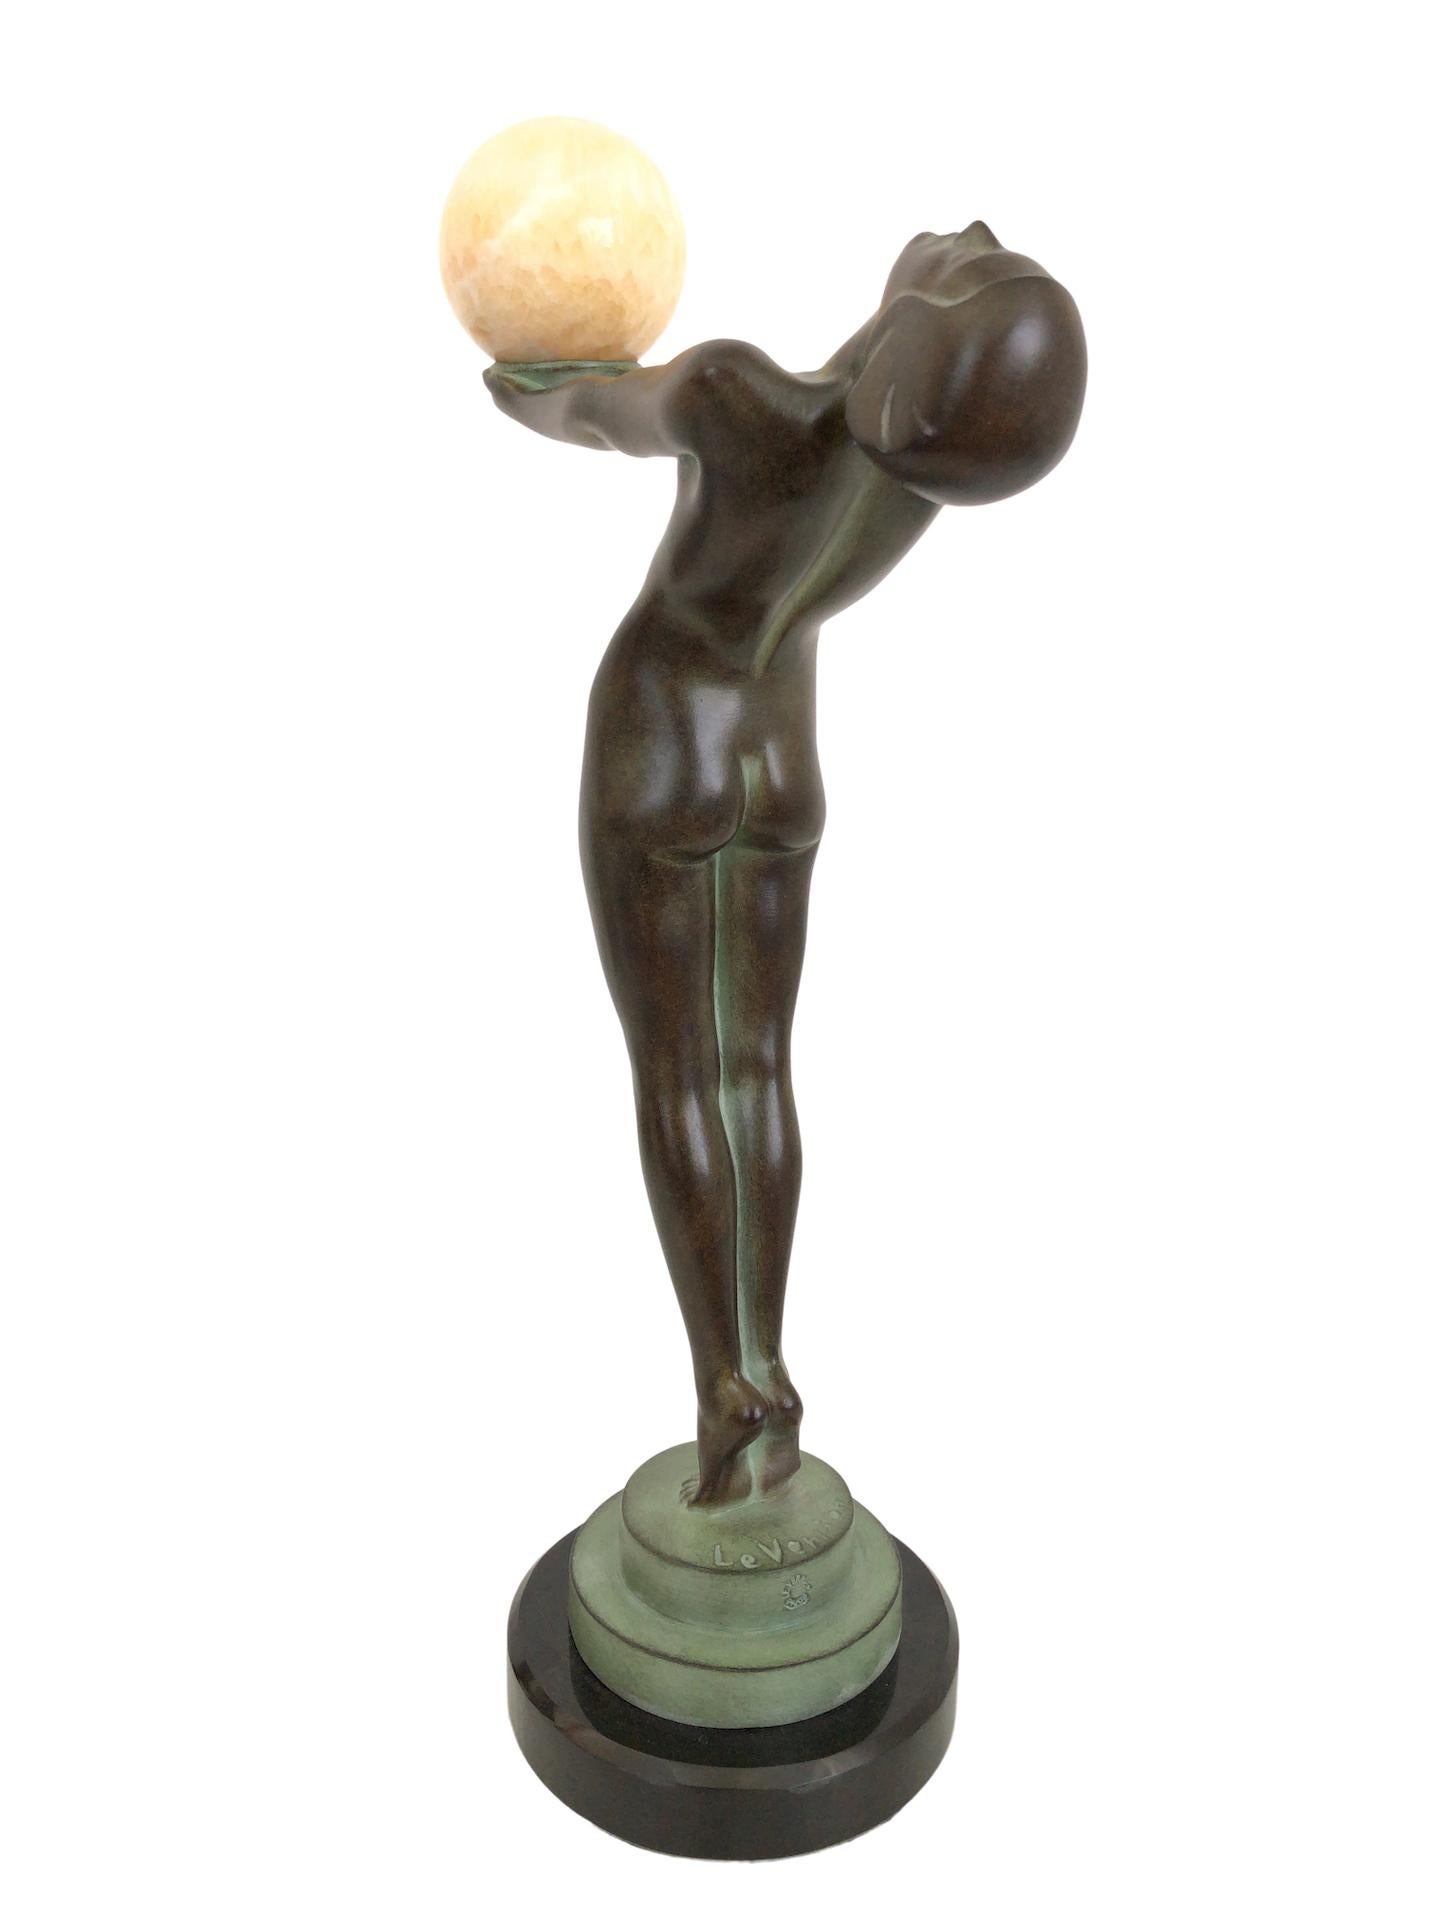 In 1928 Max Le Verrier created his famous CLARTÉ - a woman with a lighted glass ball - the main work of his career as a sculptor. 

In fact the needed several live models: one for the head, a second for the upper part of the body and a third for